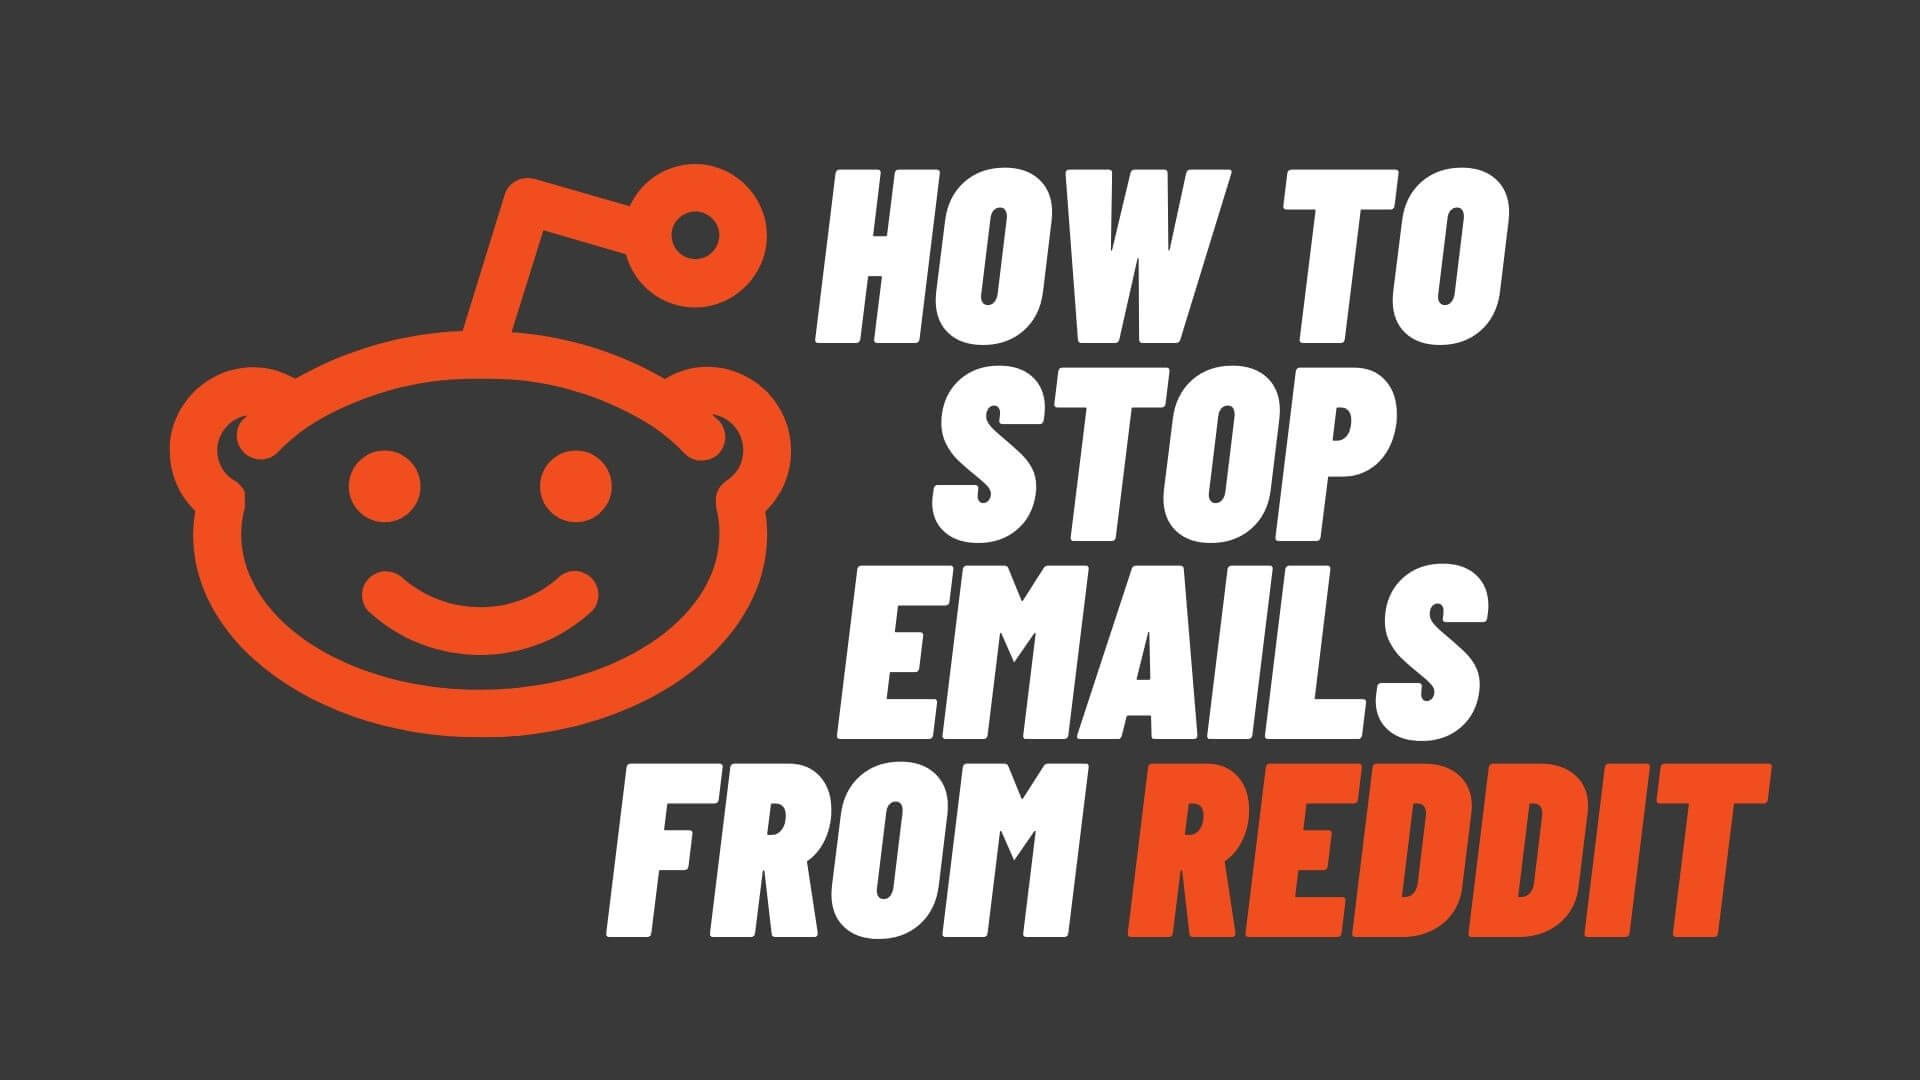 How To Stop Emails From Reddit